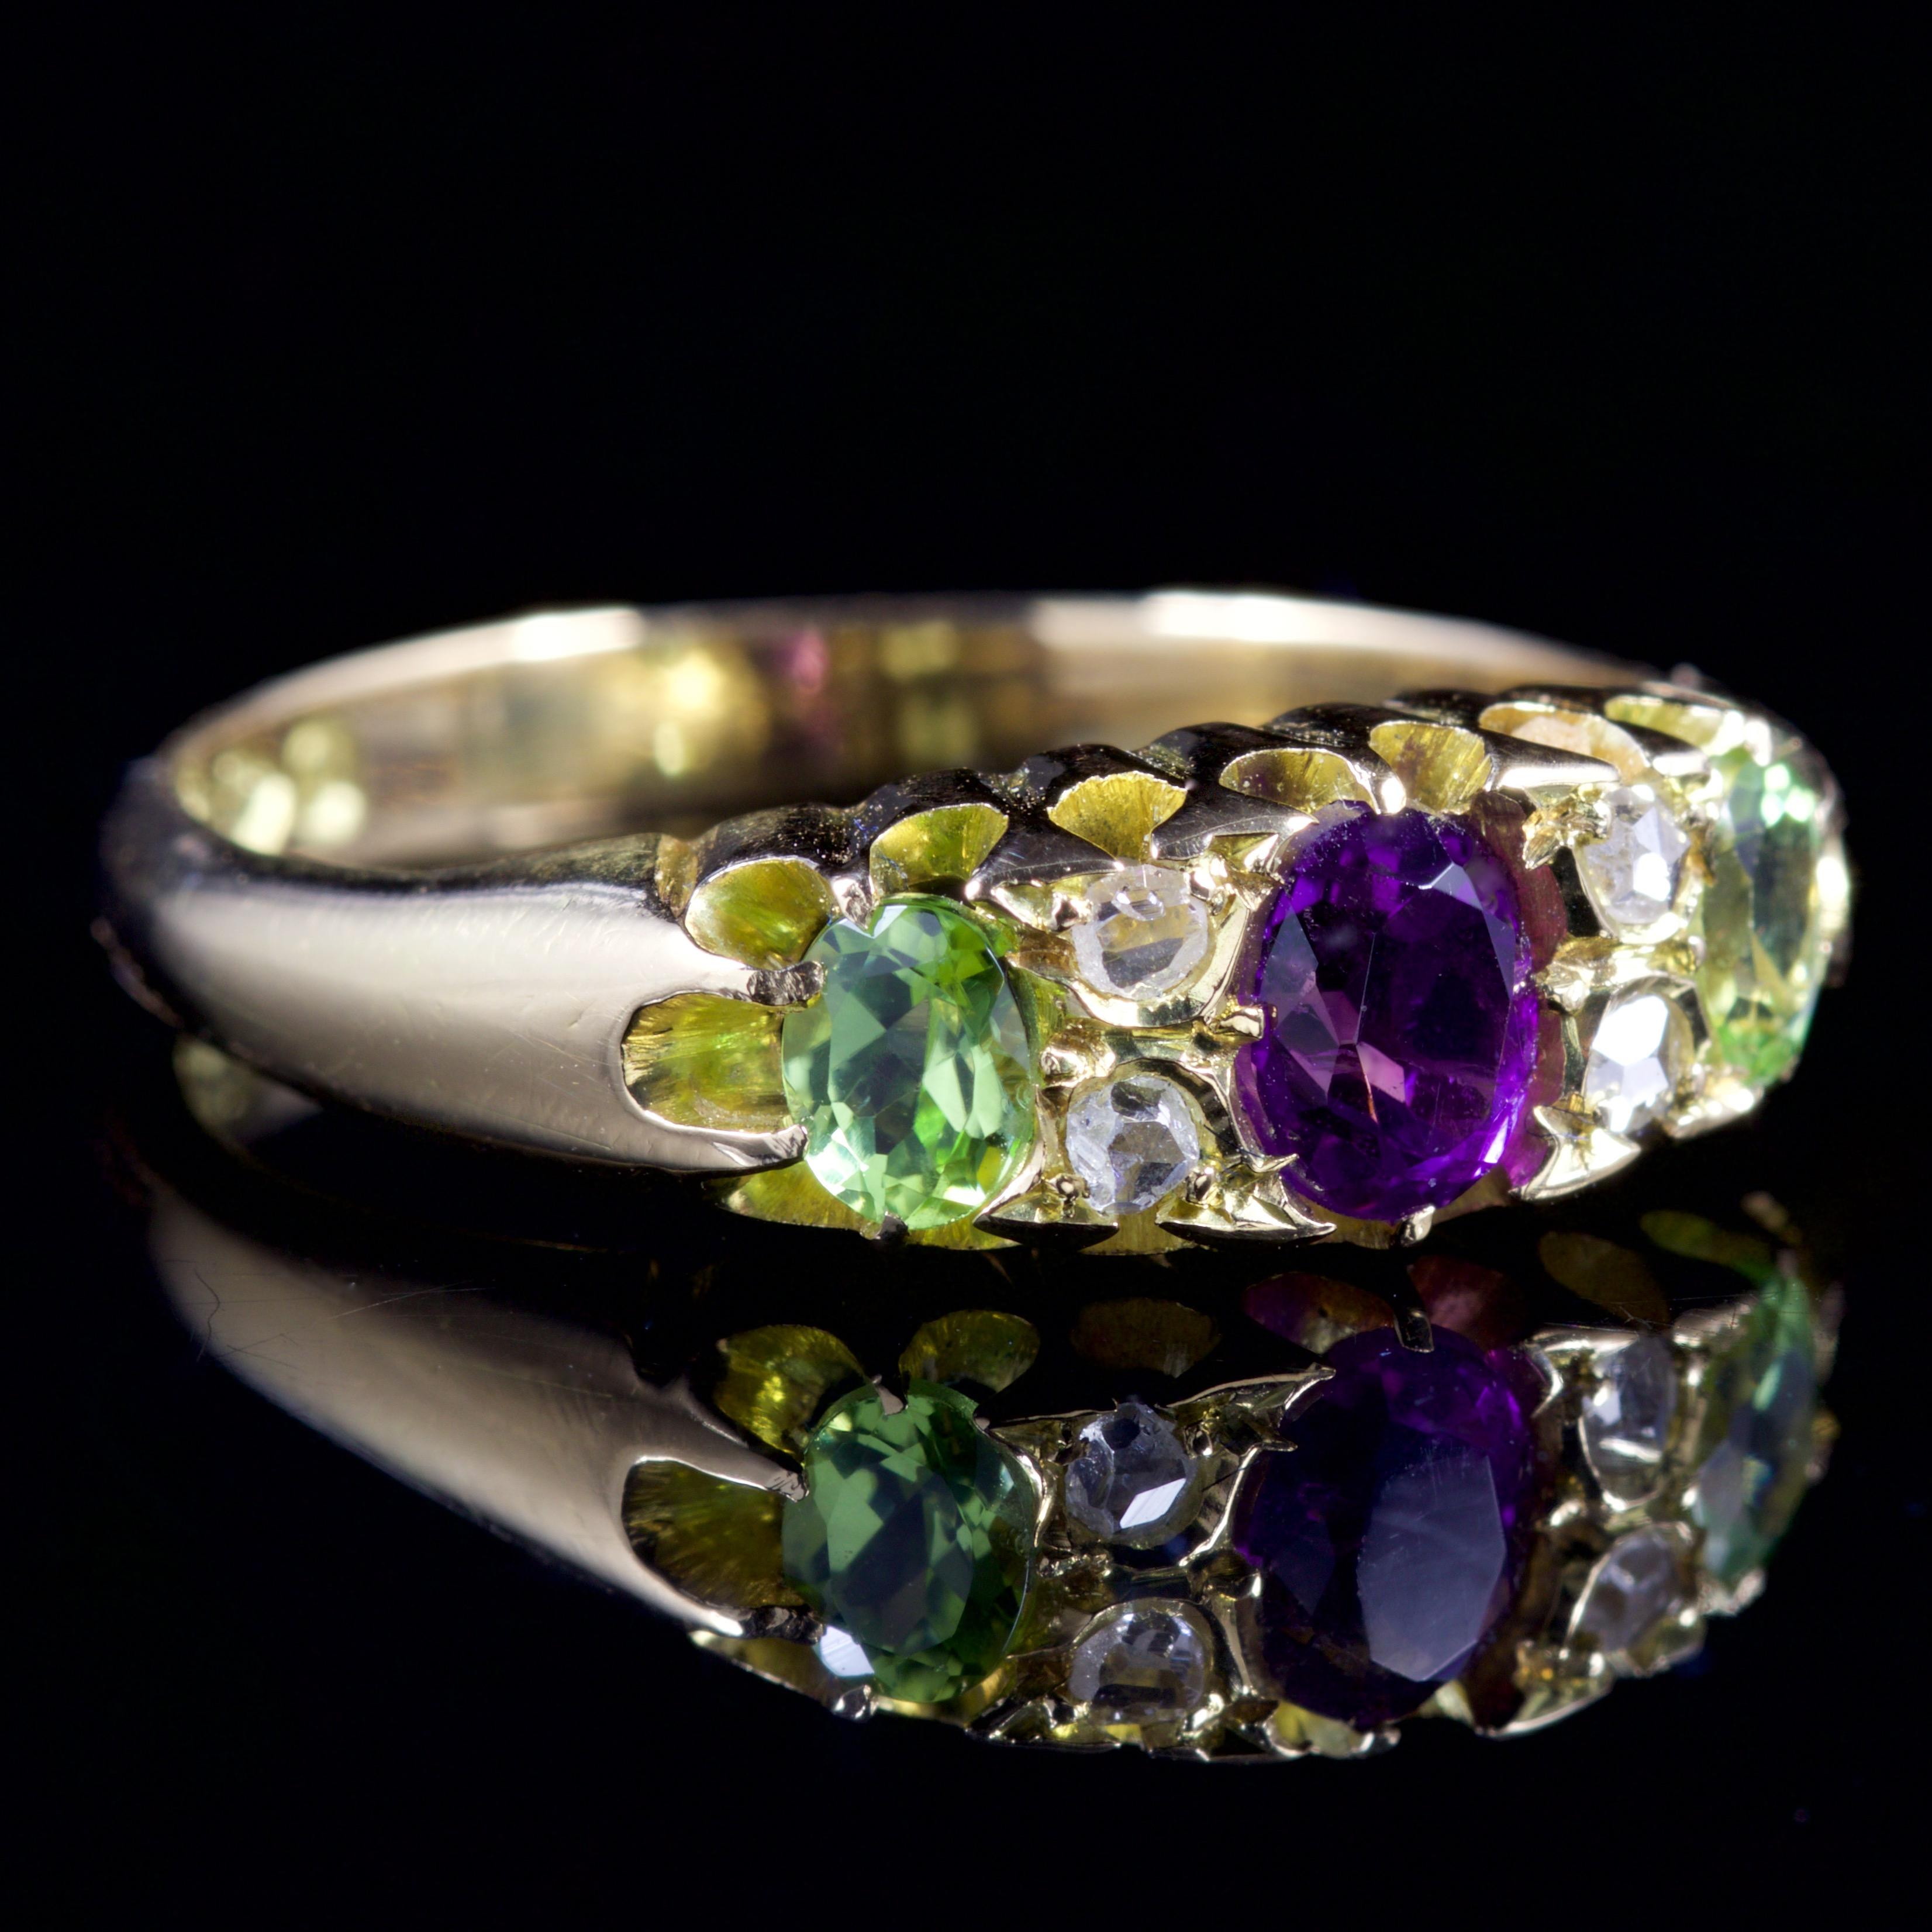 This beautiful Victorian 18ct Gold Suffragette ring is dated Chester 1897.

The wonderful ring is decorated with a deep, purple 0.25ct Amethyst, with two rich green Peridots and lovely sparkling old cut Diamonds nestled in-between.

Suffragettes